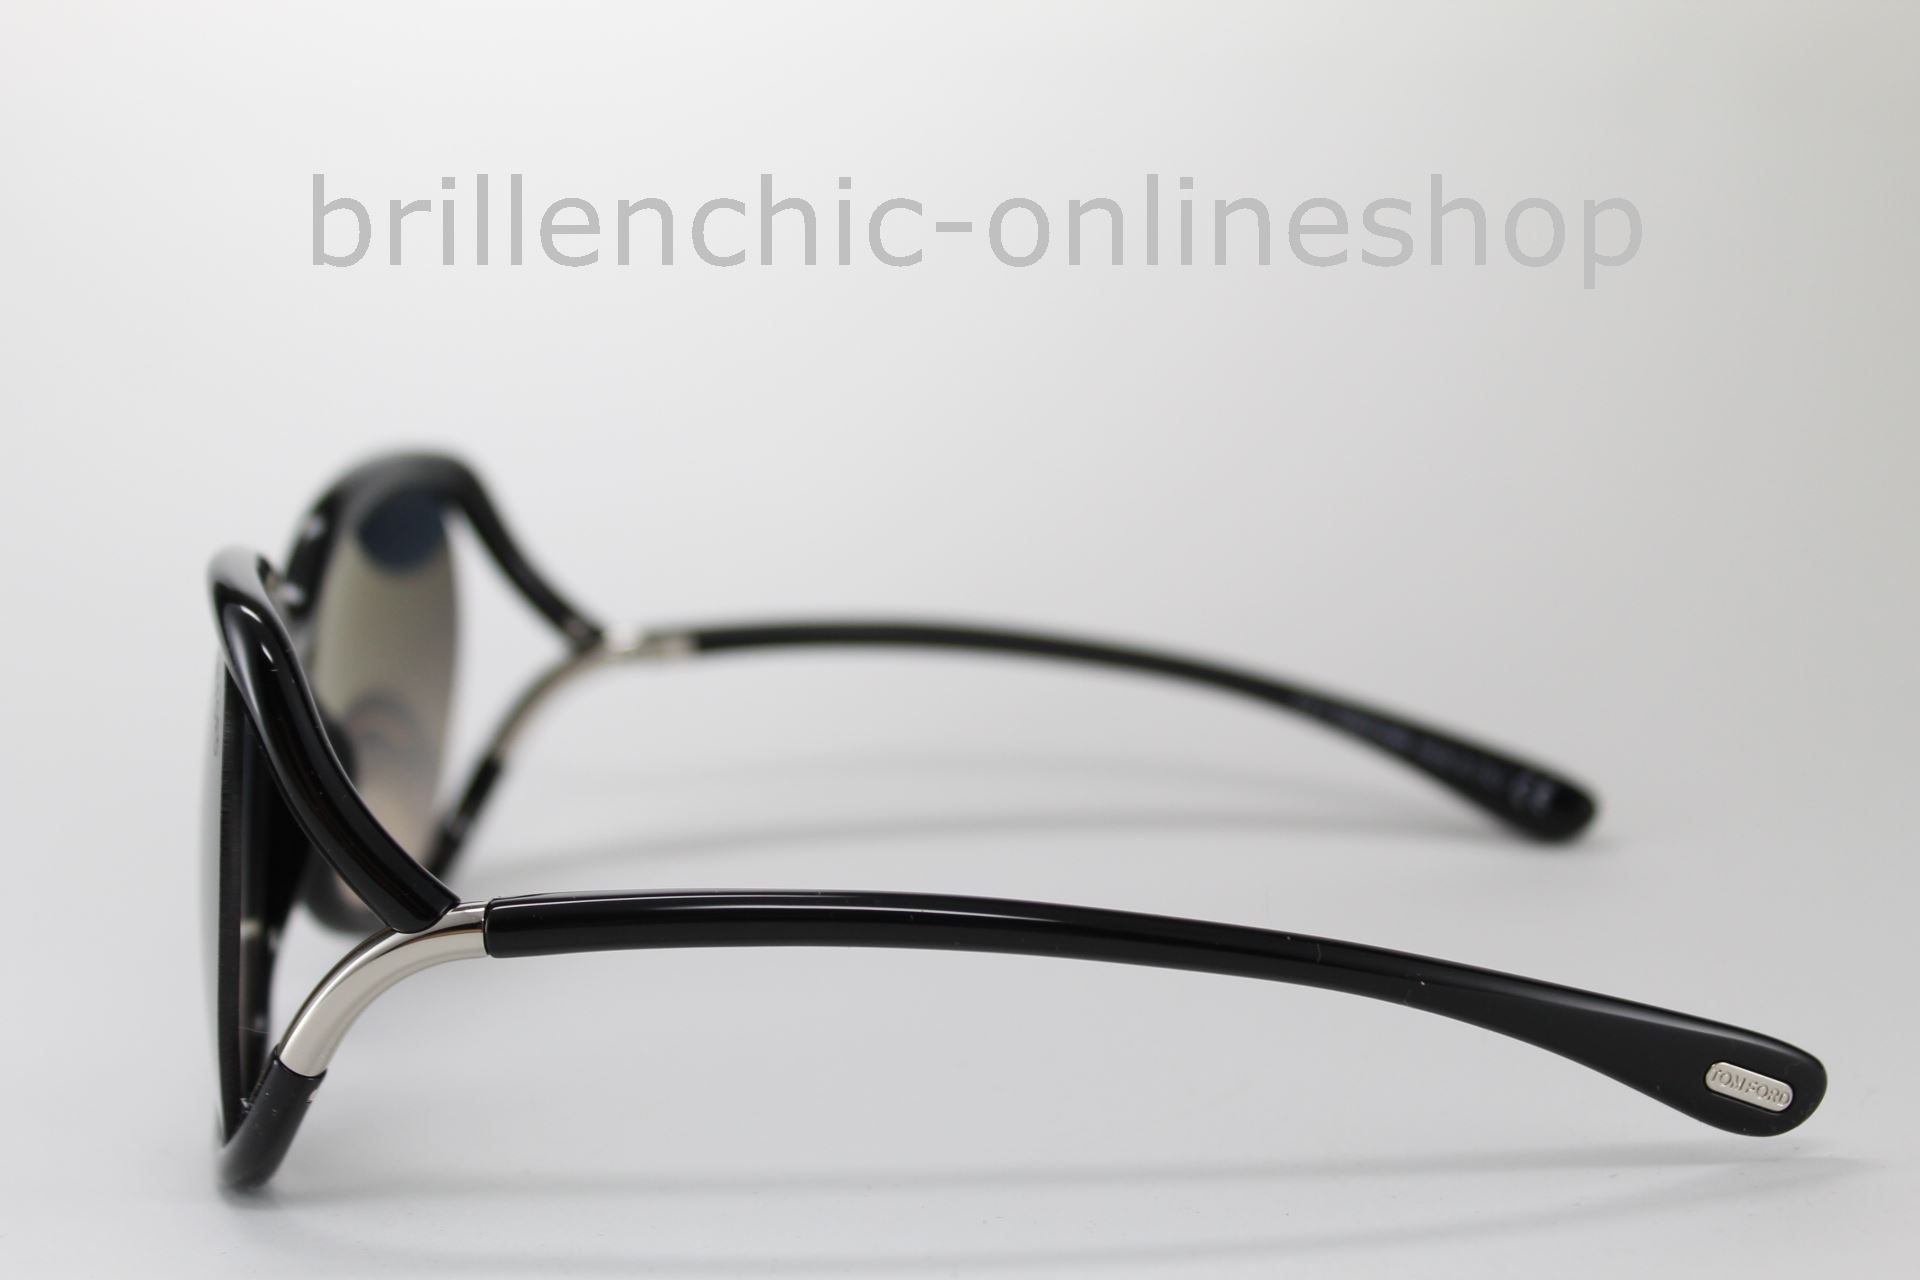 Brillenchic-onlineshop in Berlin - TOM FORD TF 578 01B ANOUK 02 